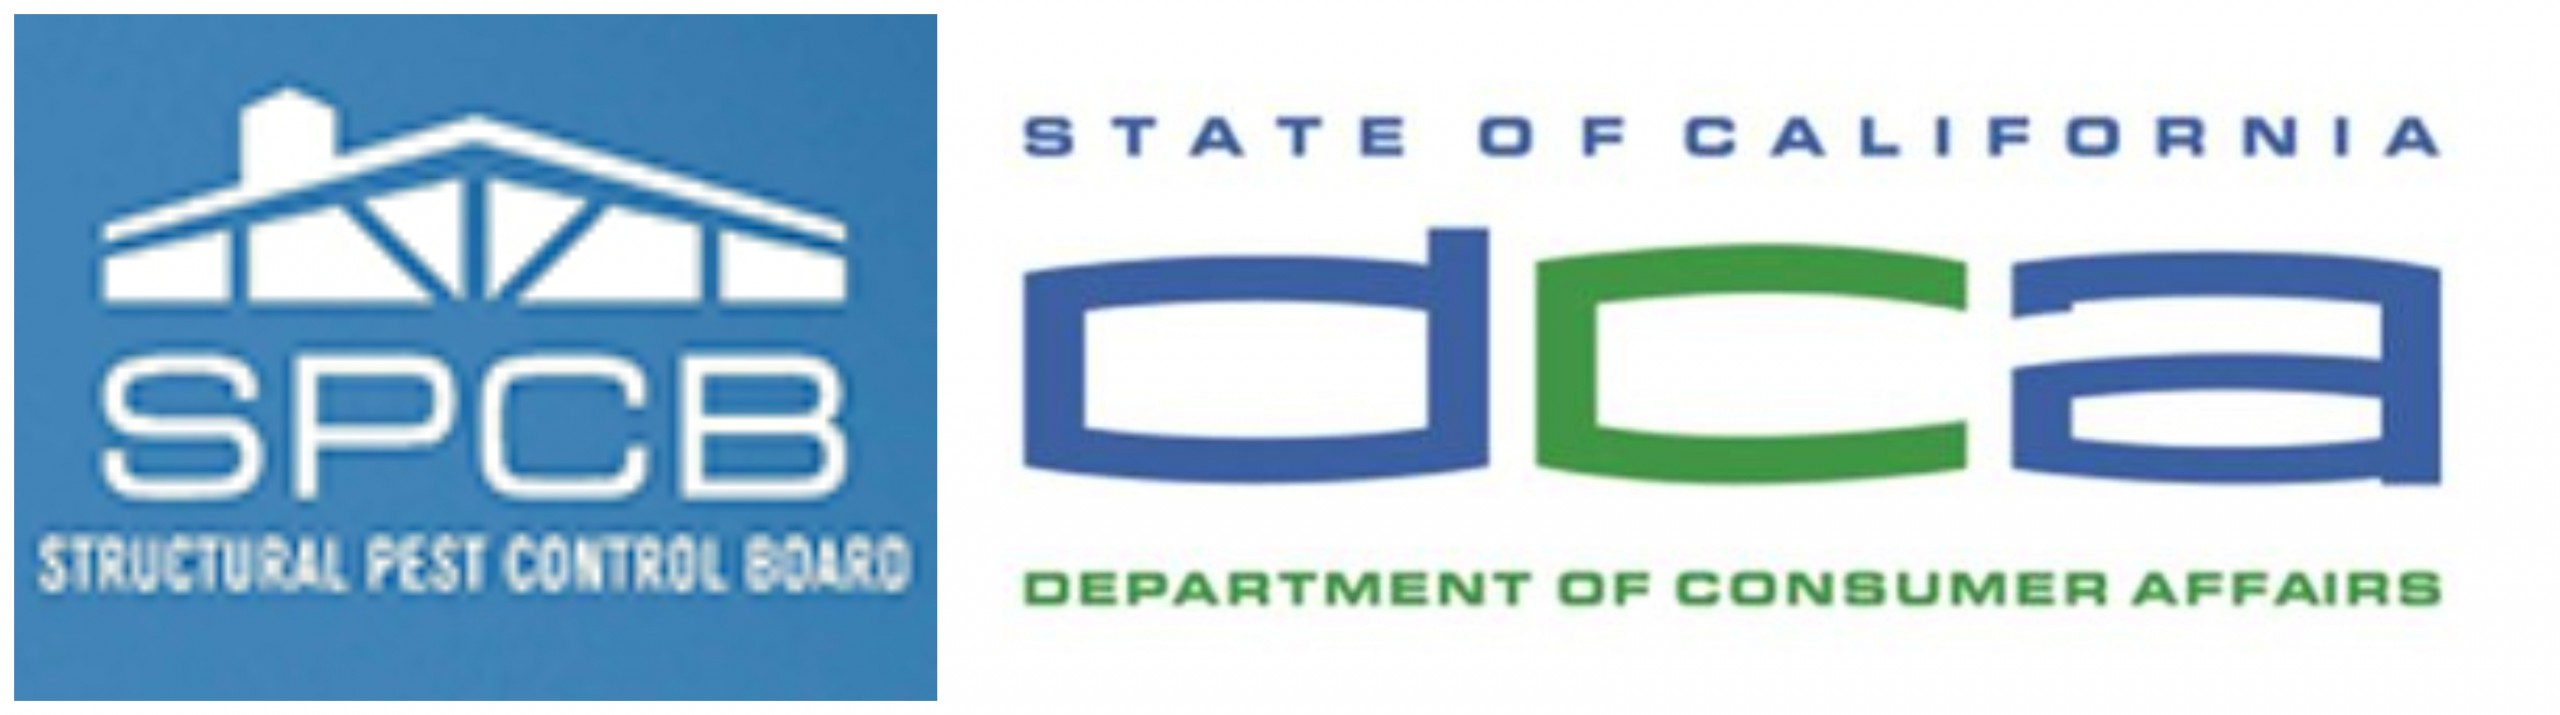 Structural Pest Control Board logo and Department of Consumer Affairs logo